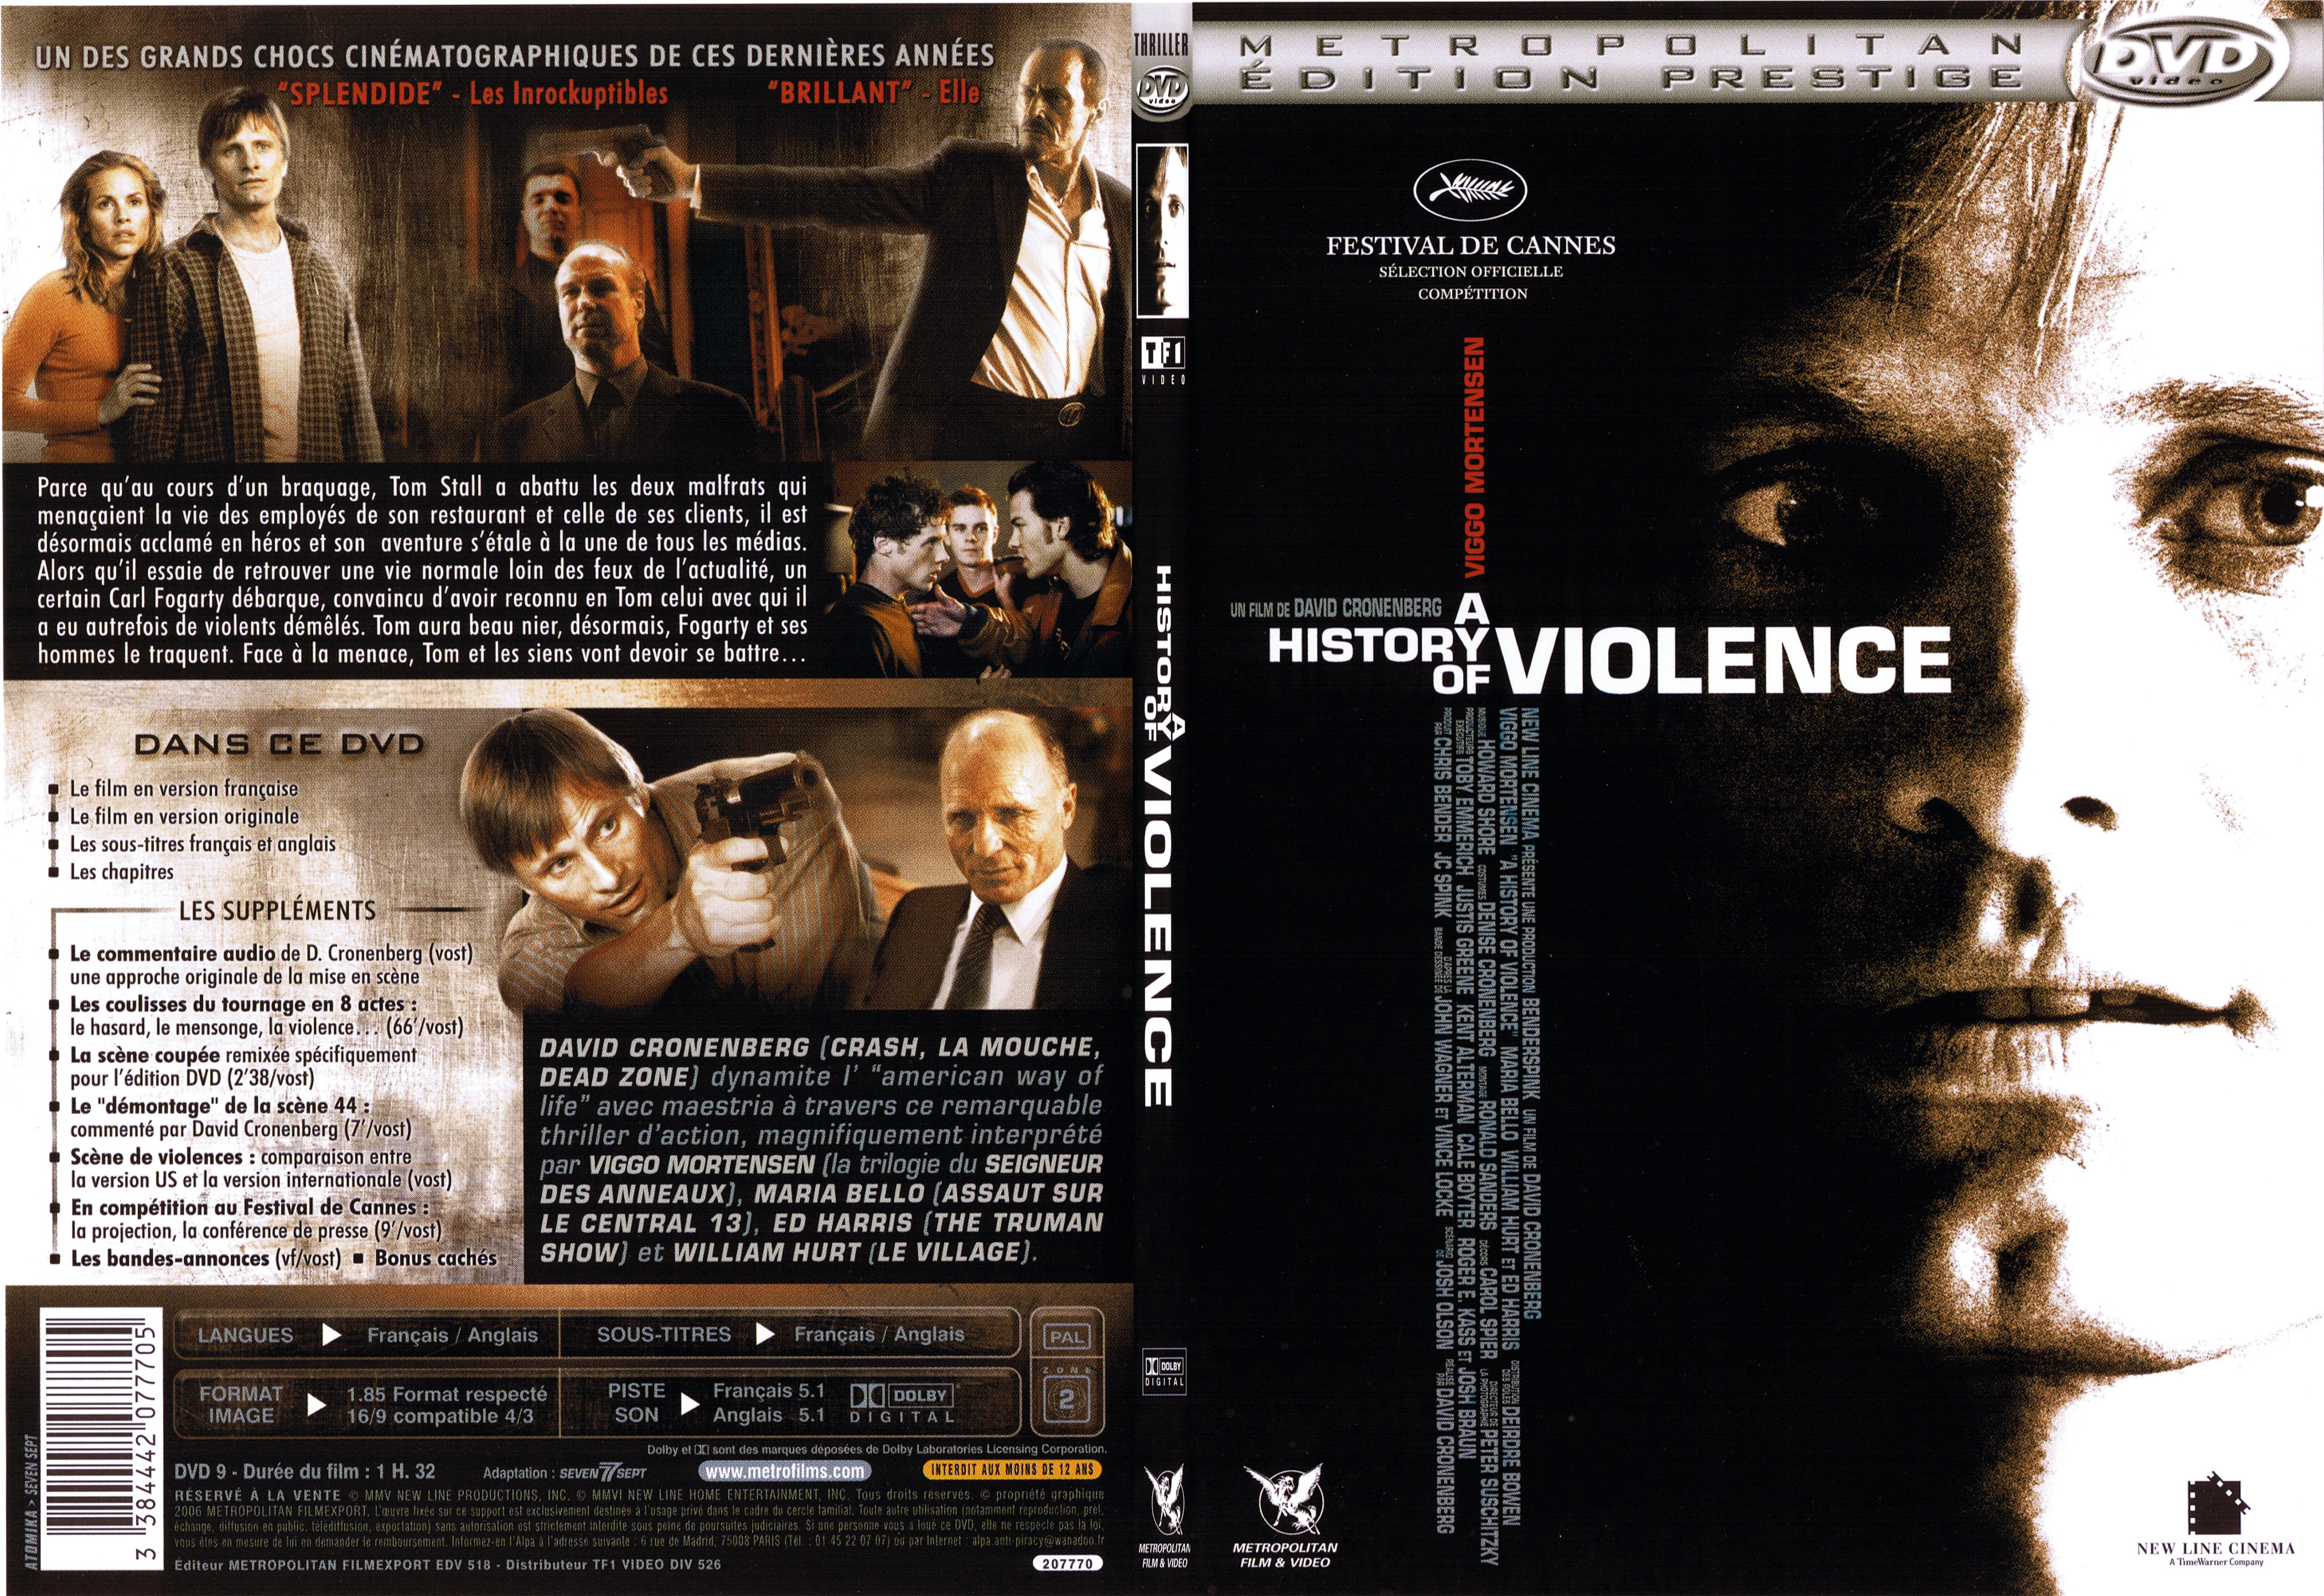 Jaquette DVD A history of violence - SLIM